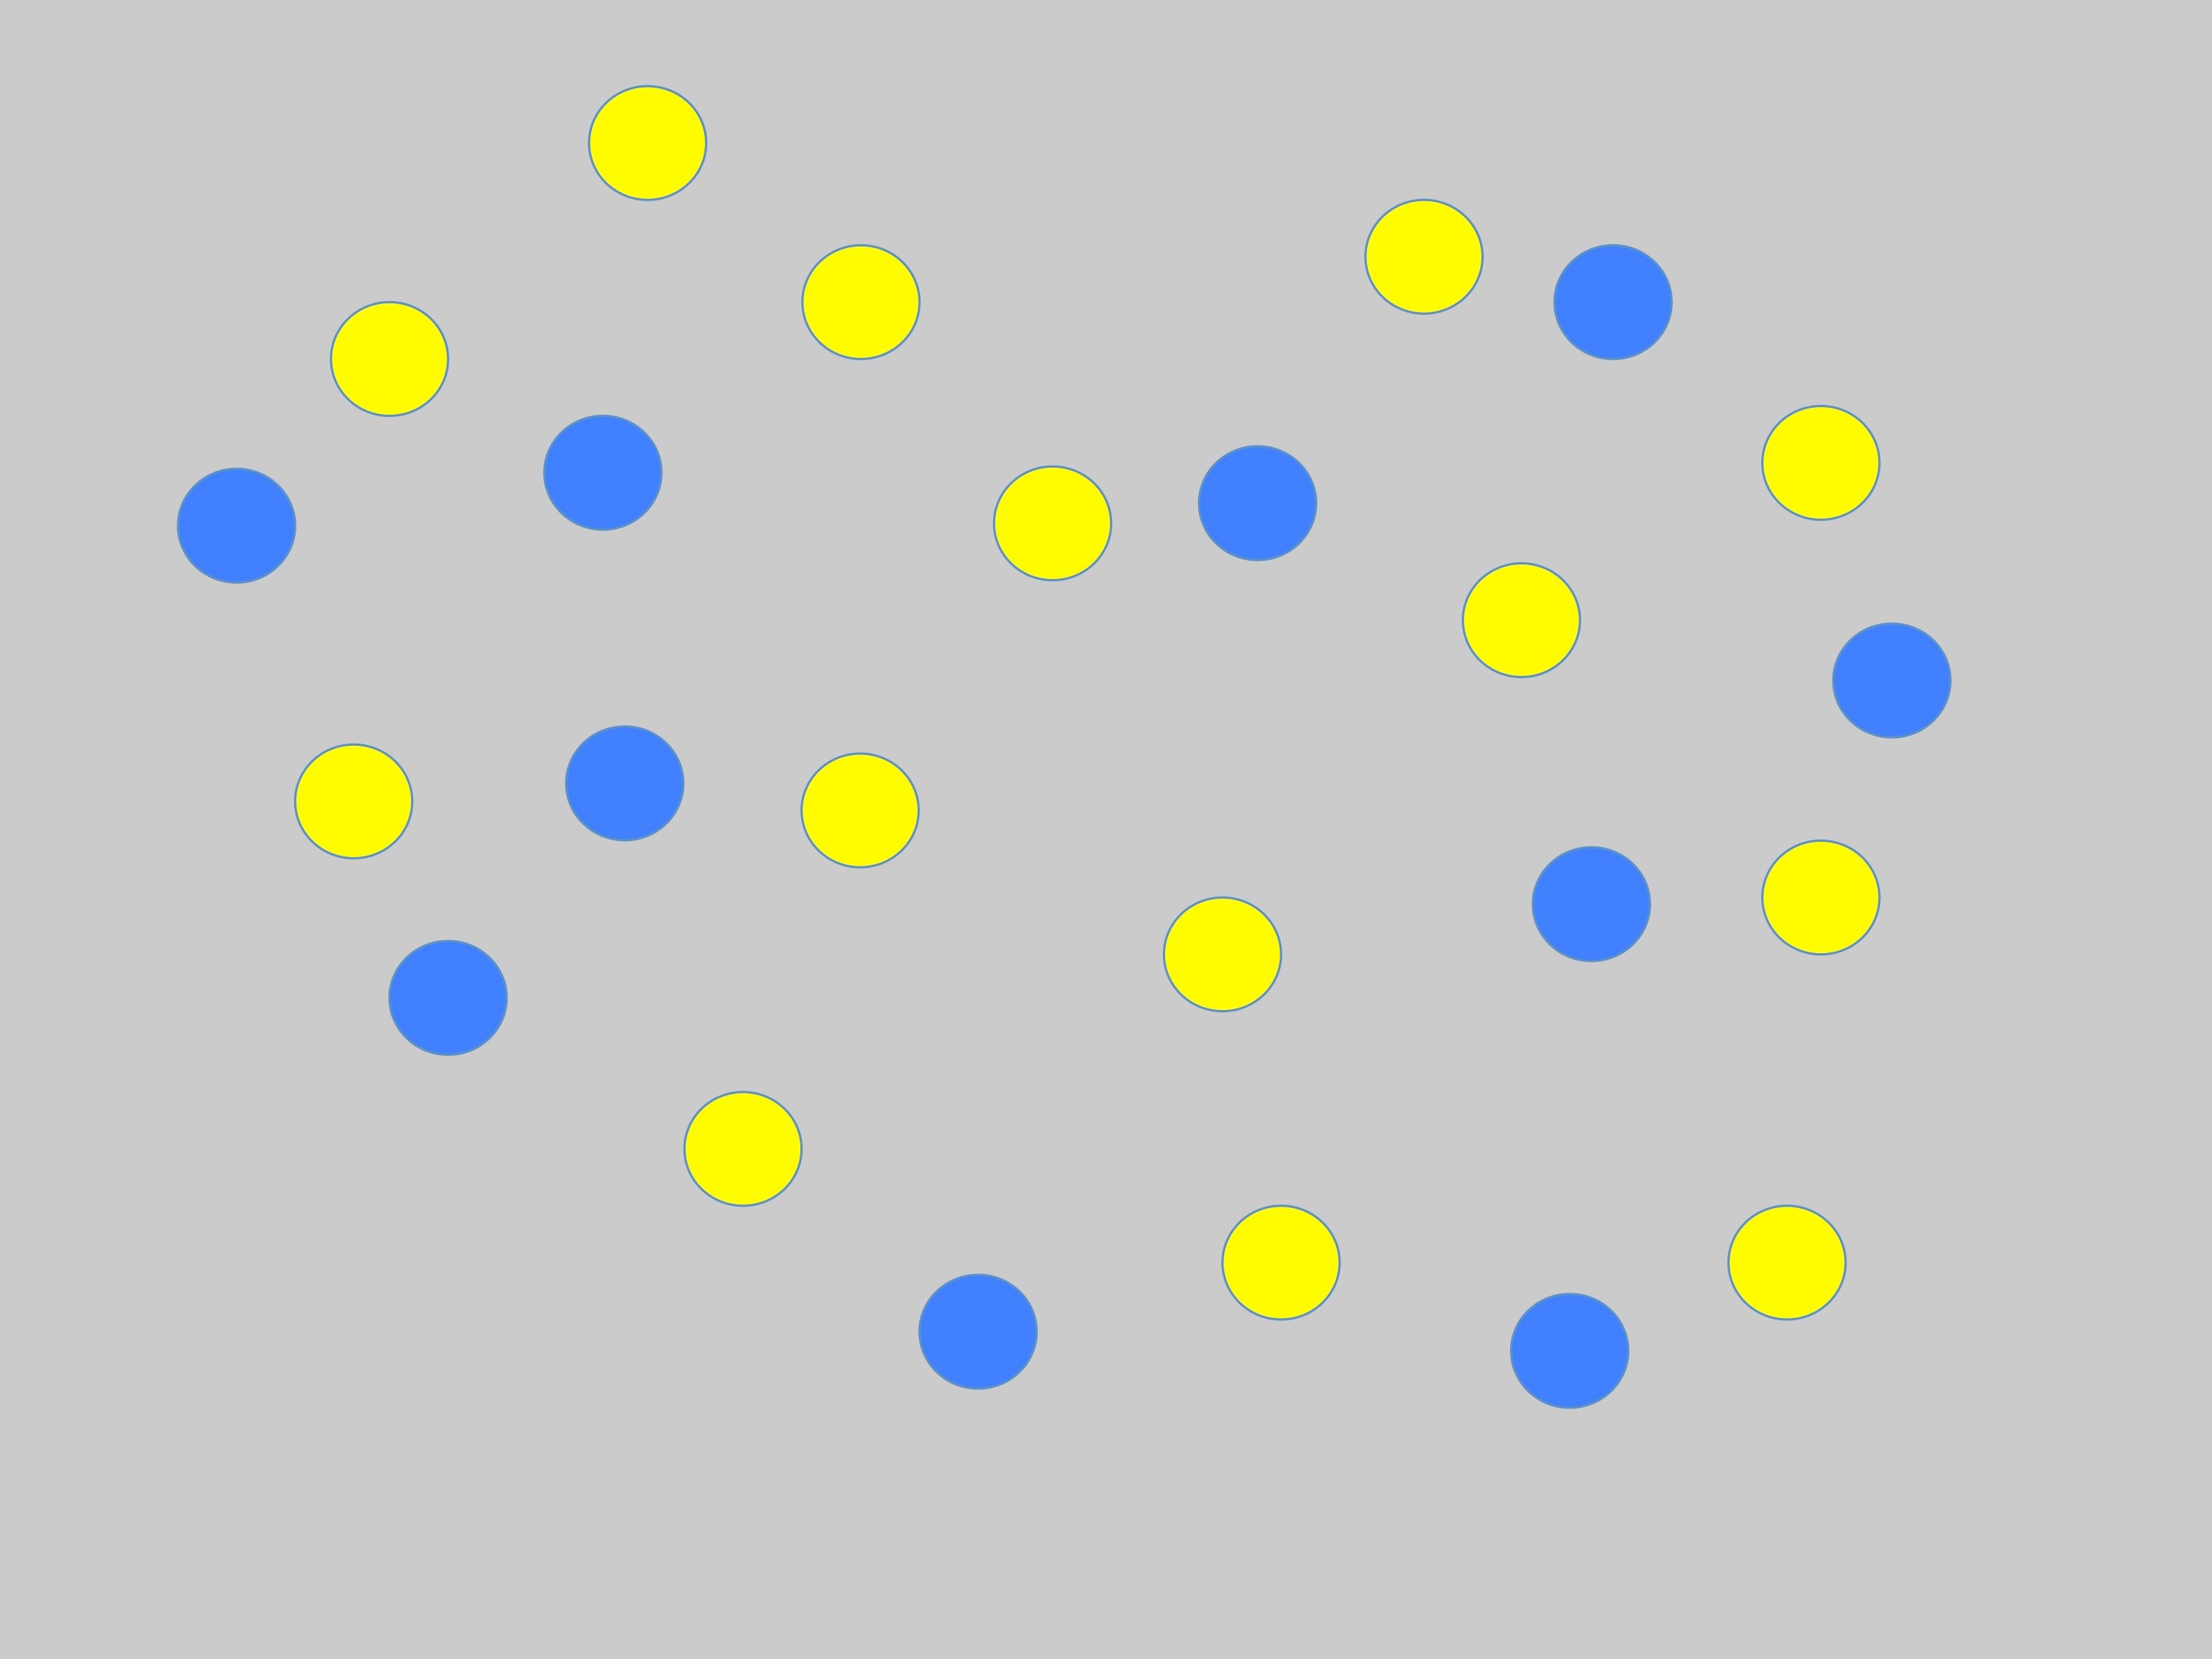 An image with both yellow and blue dots scattered. There are 14 yellow dots and 10 blue dots.